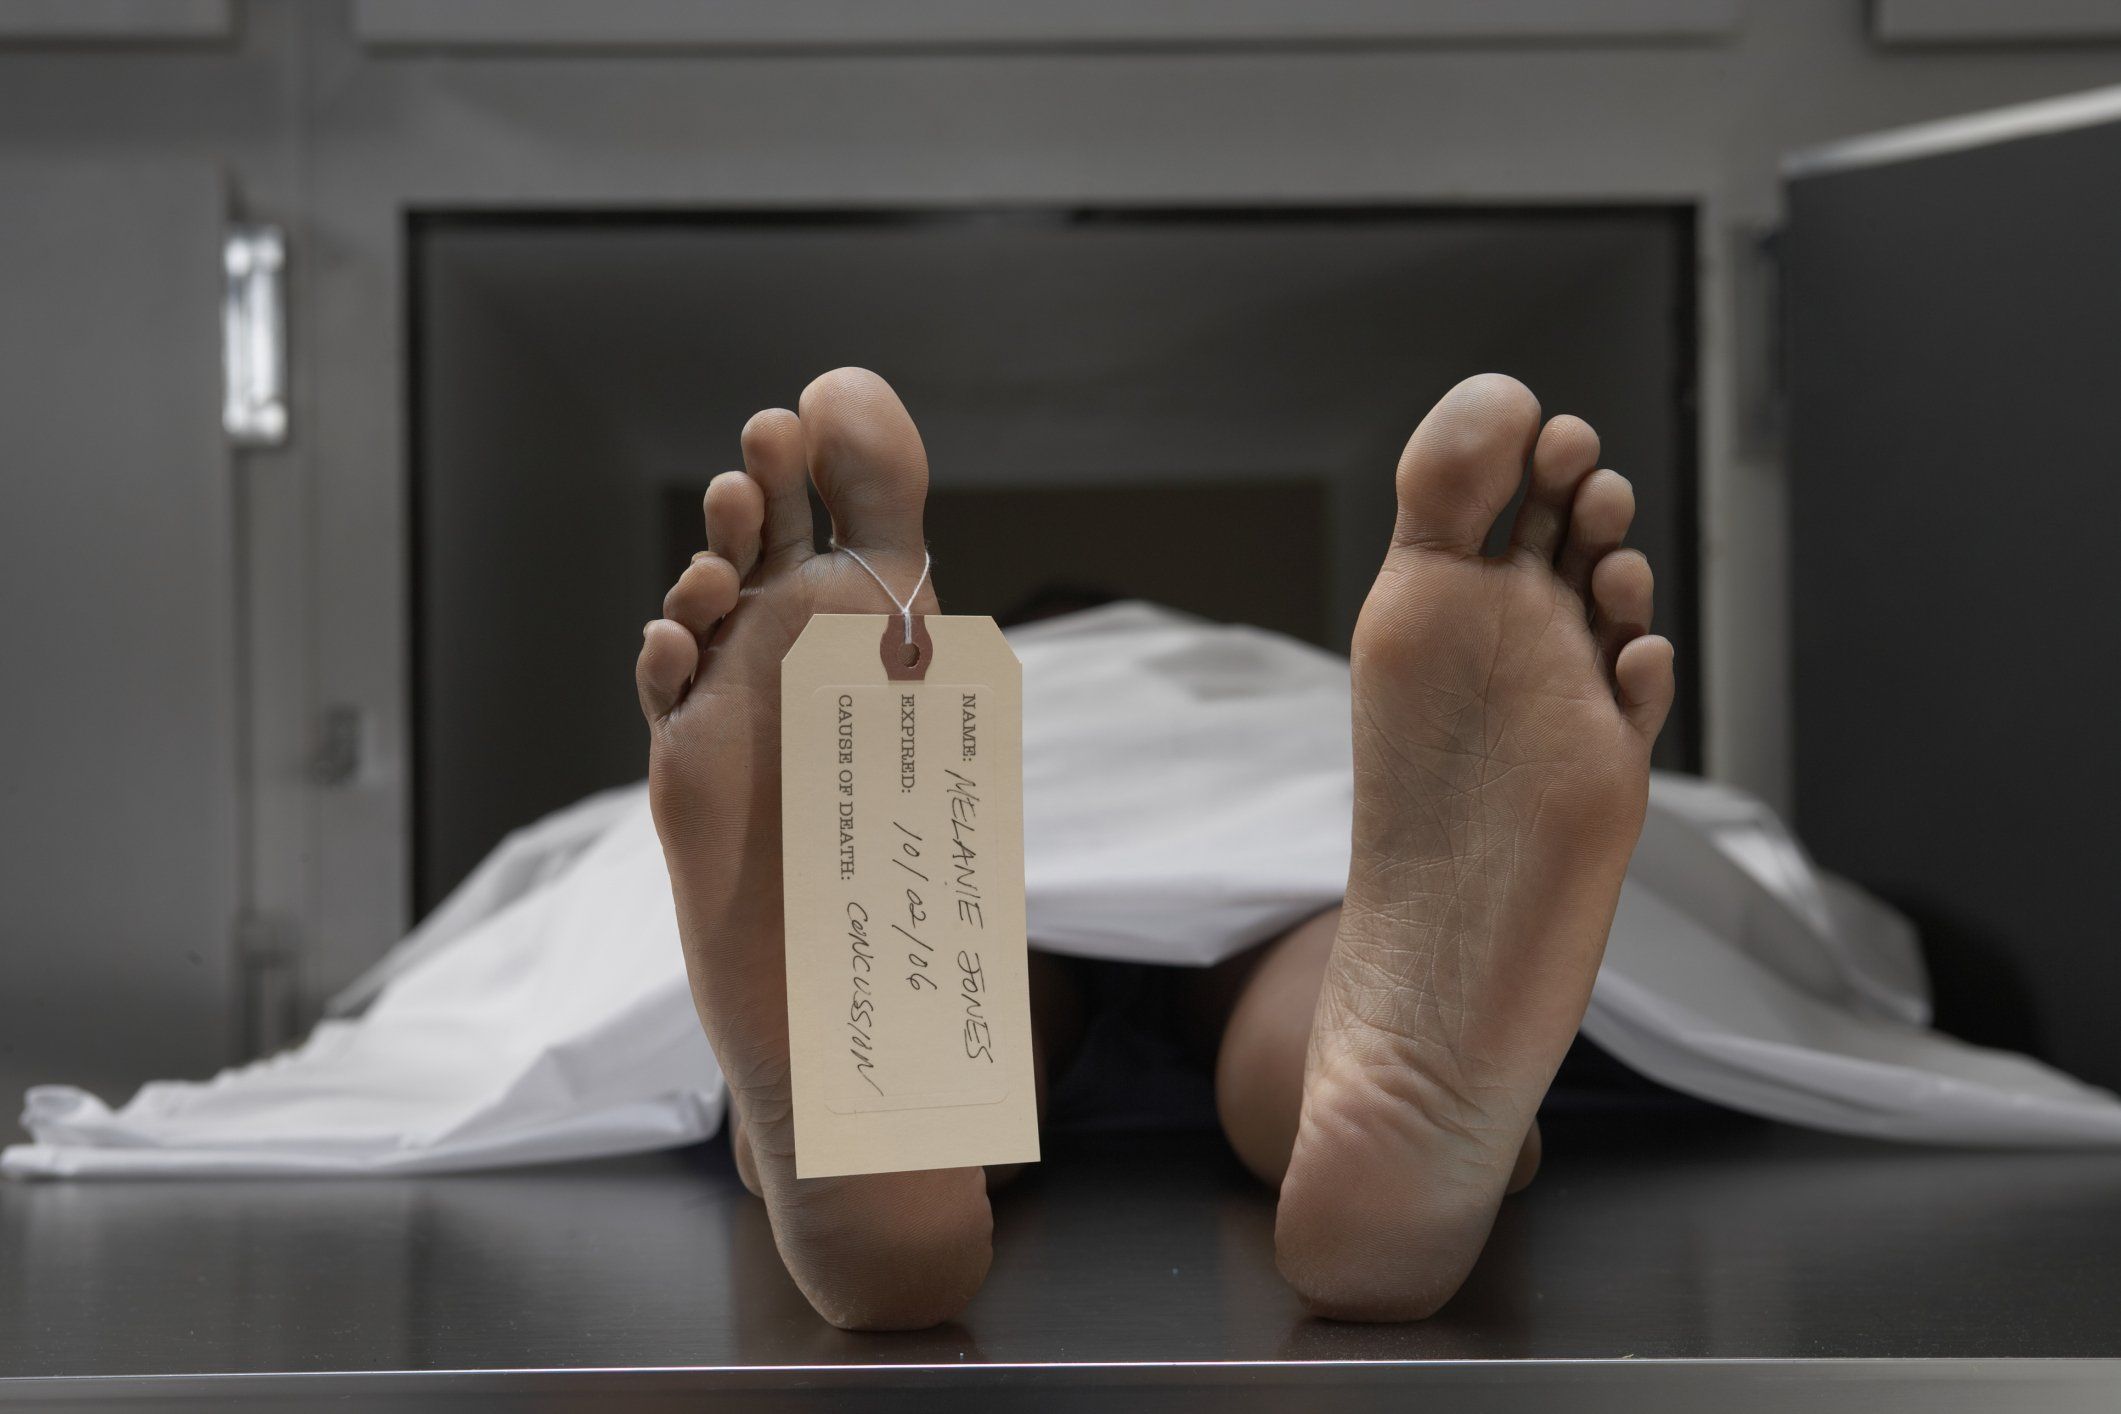 Funeral director and embalmer salary in canada